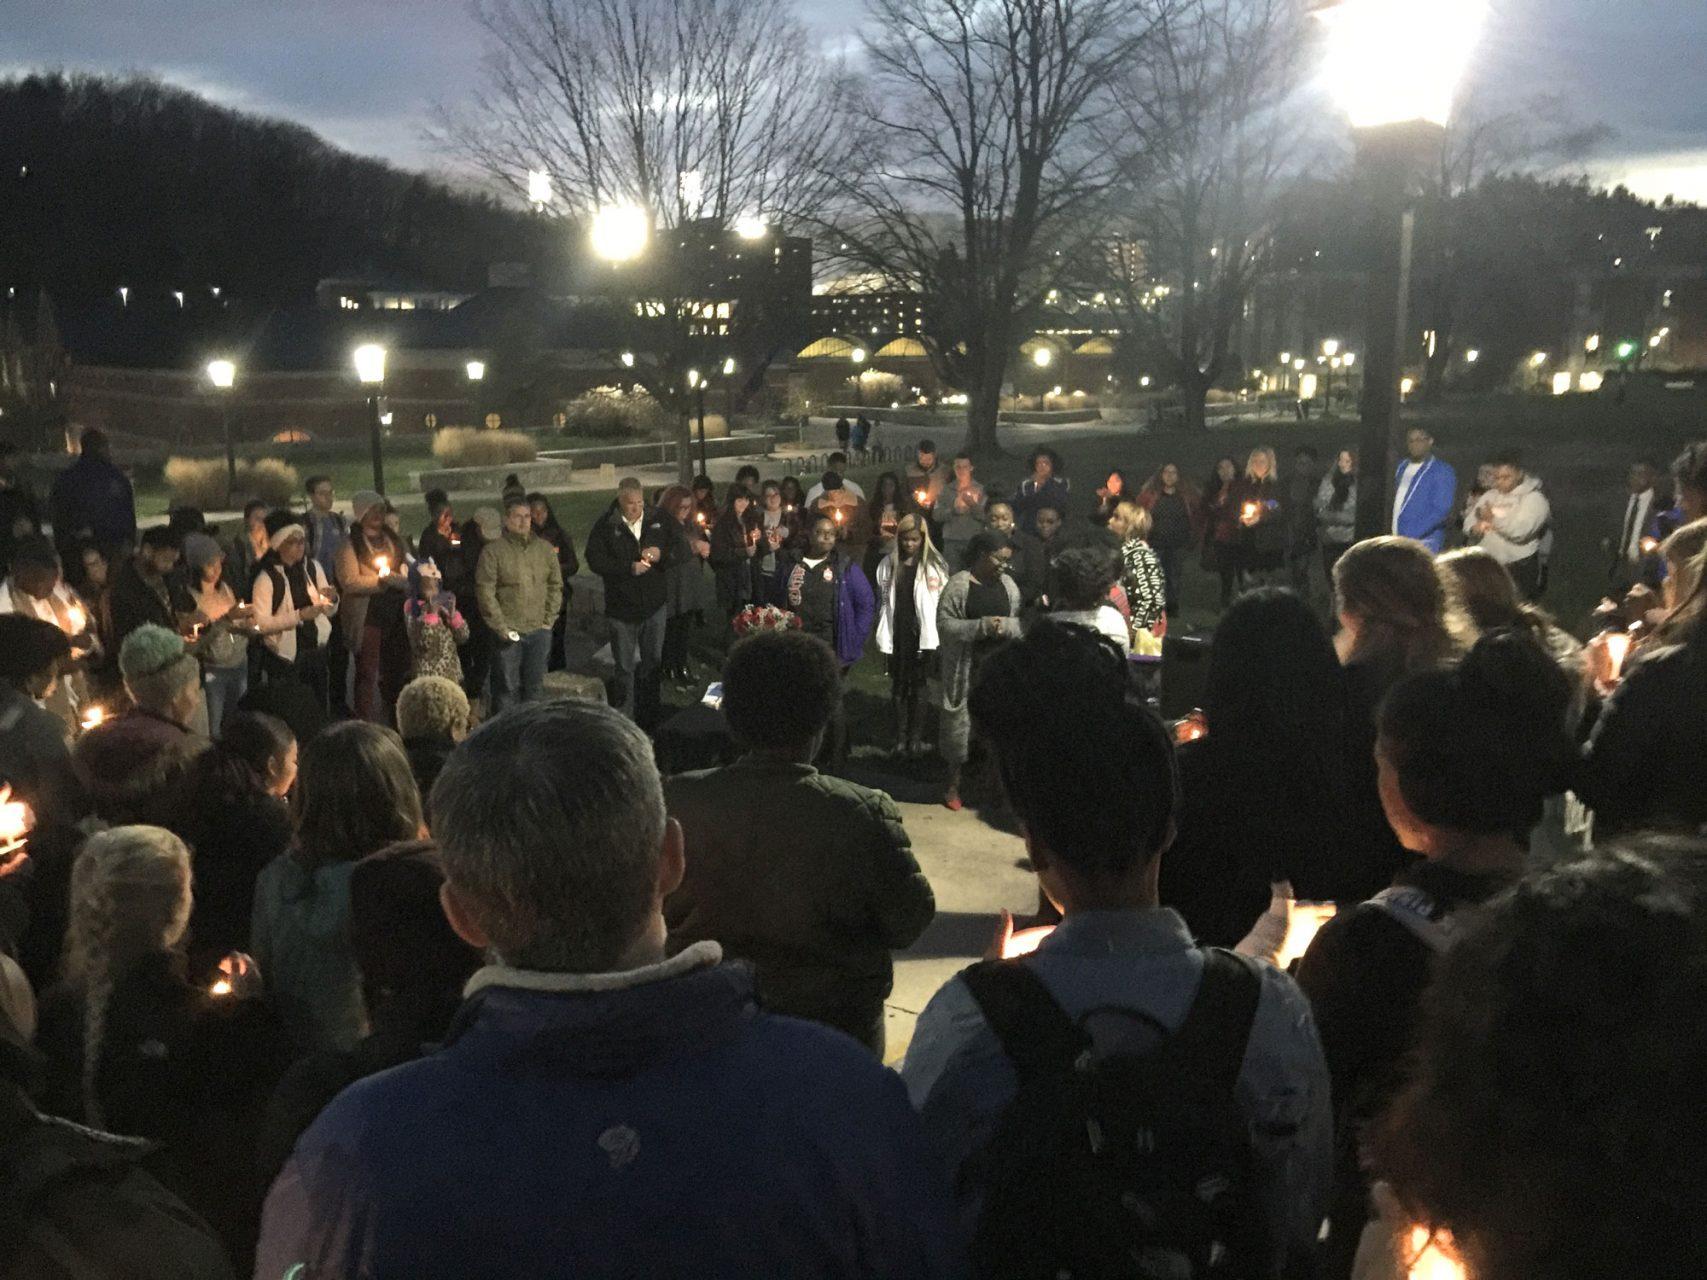 People+gathered+on+Sanford+Mall+for+the+vigil+in+memory+of+Alexis+Fegan+who+passed+away+on+Nov.+12+after+battling+cancer.++